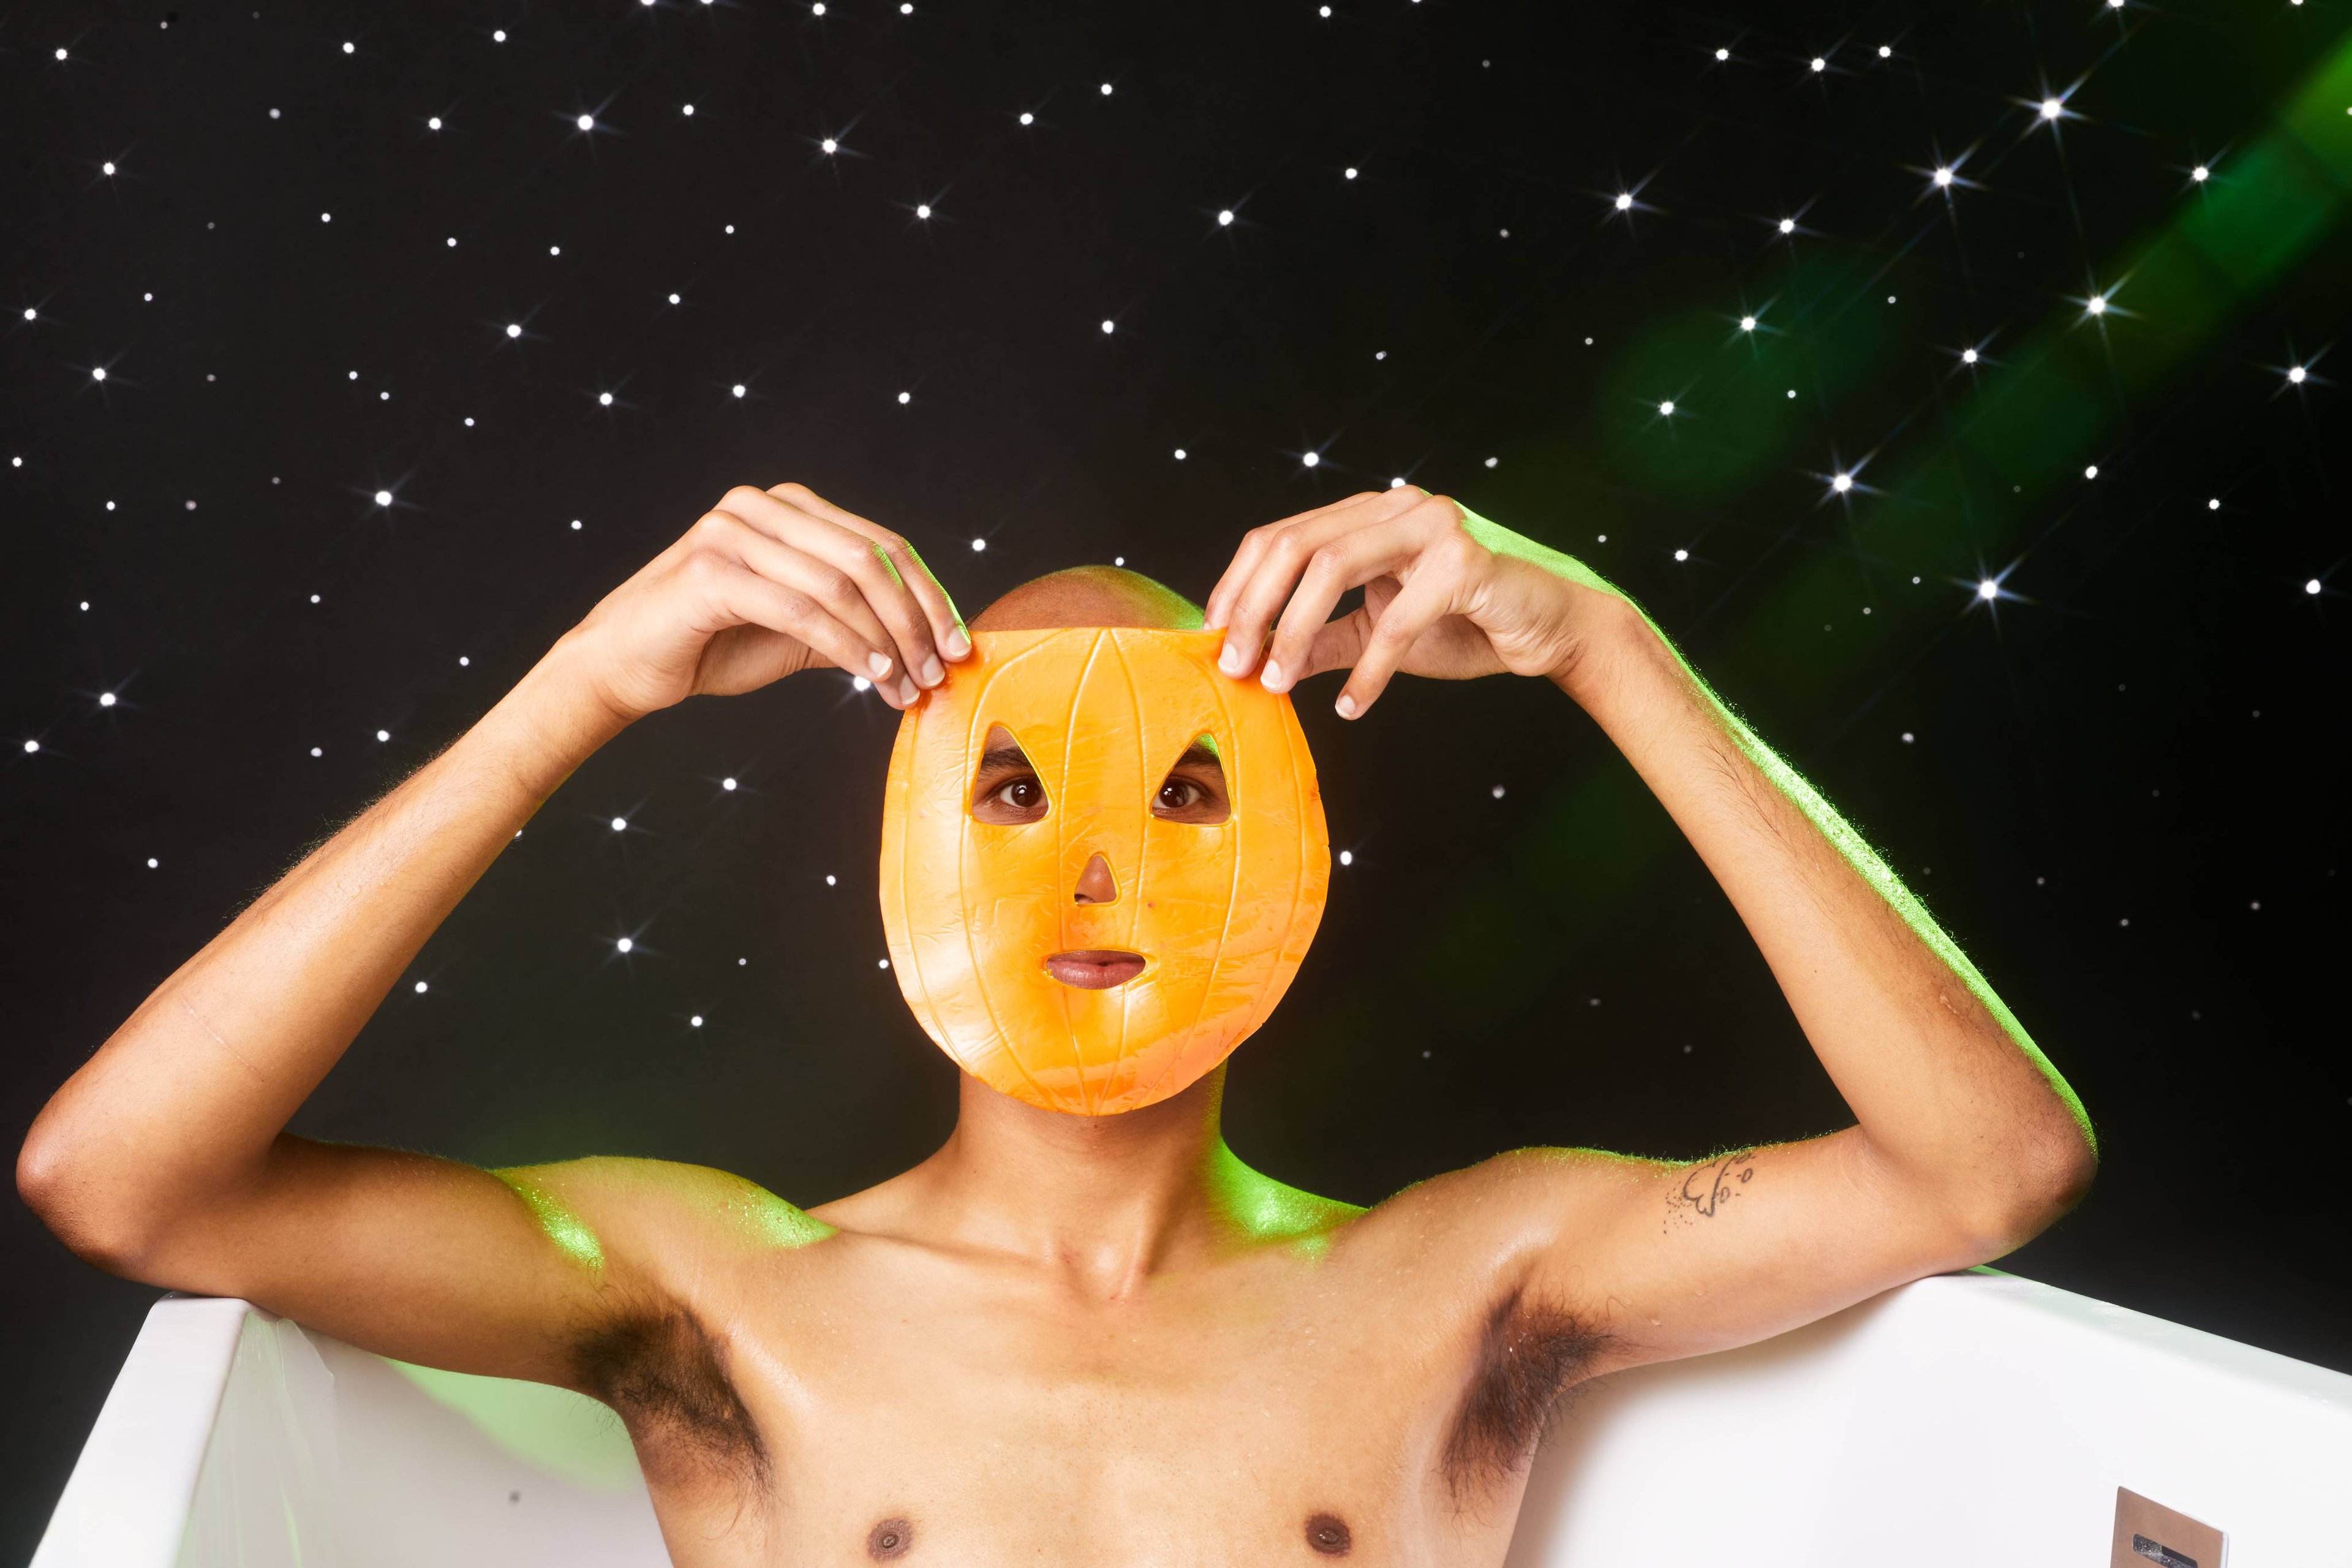 Image shows the model sitting in a bath on a twinkling background. They are holding the orange sheet mask up to their face.